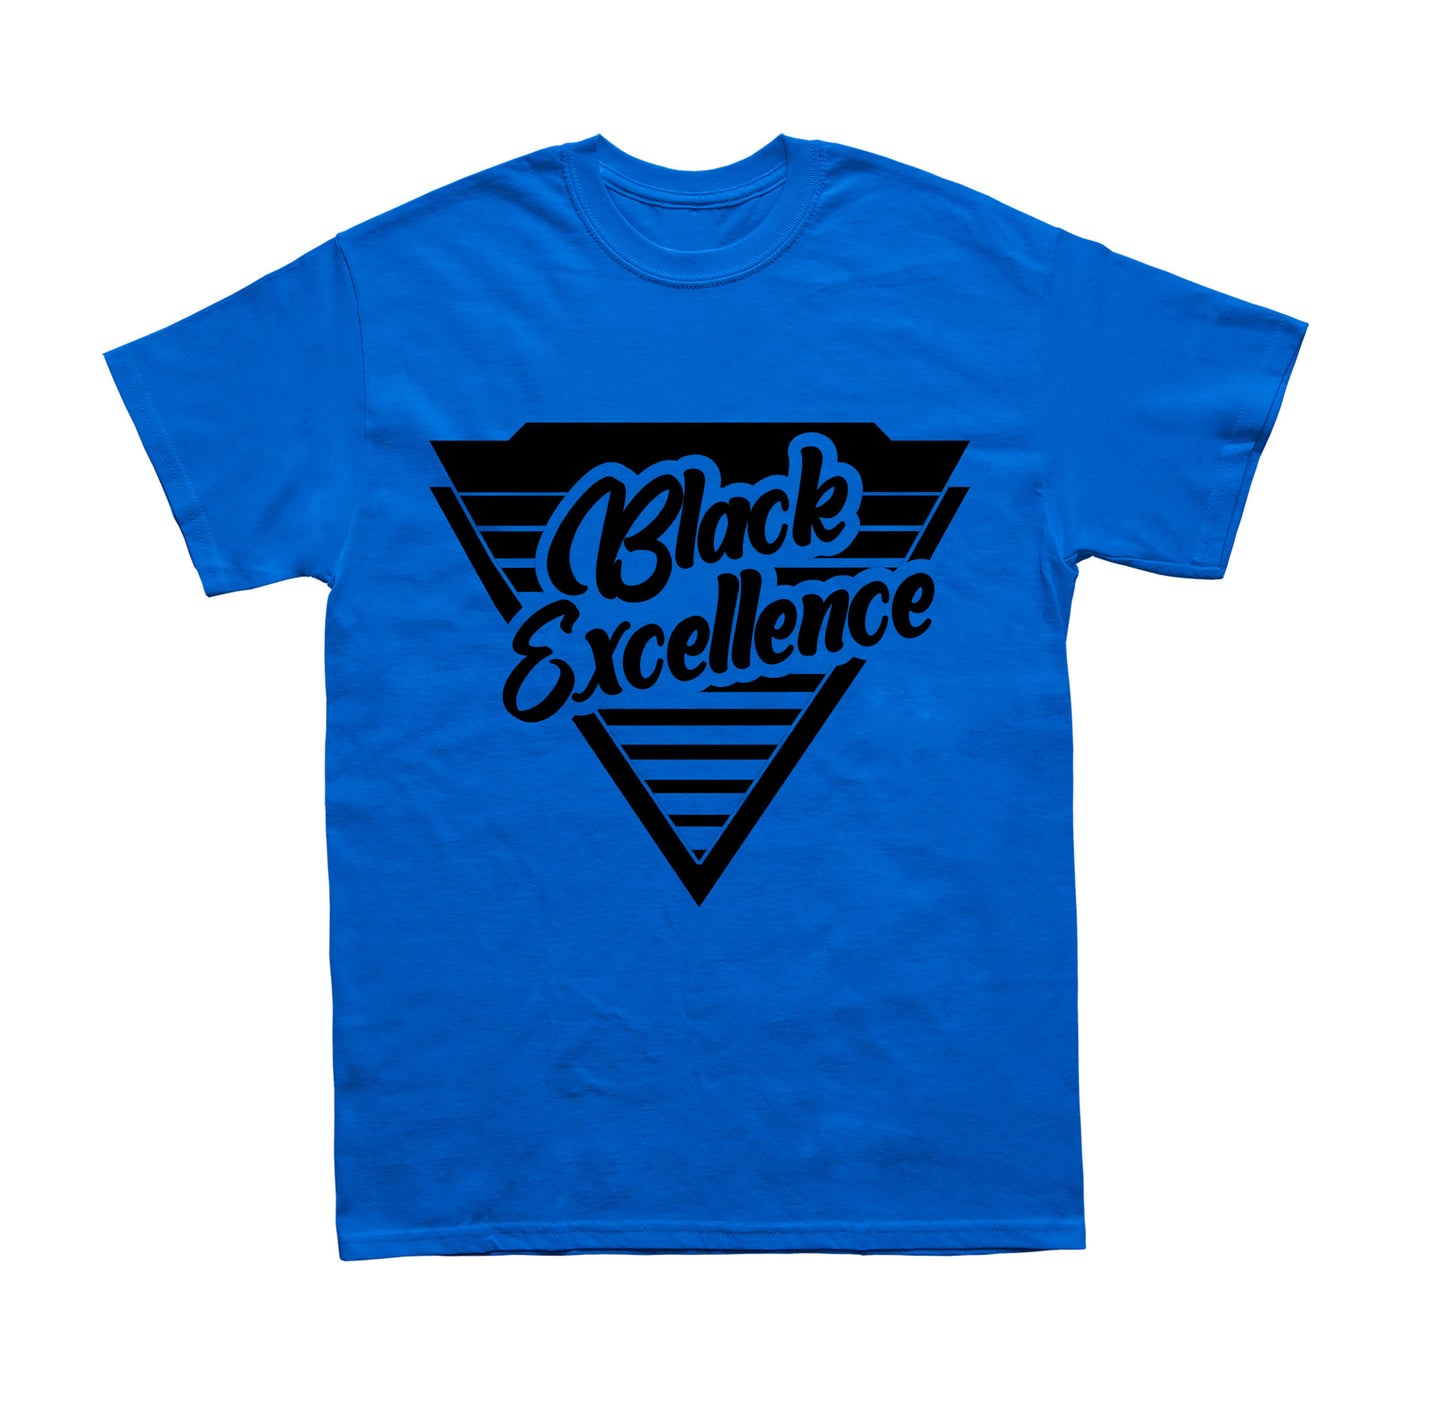 Black Excellence Shirt